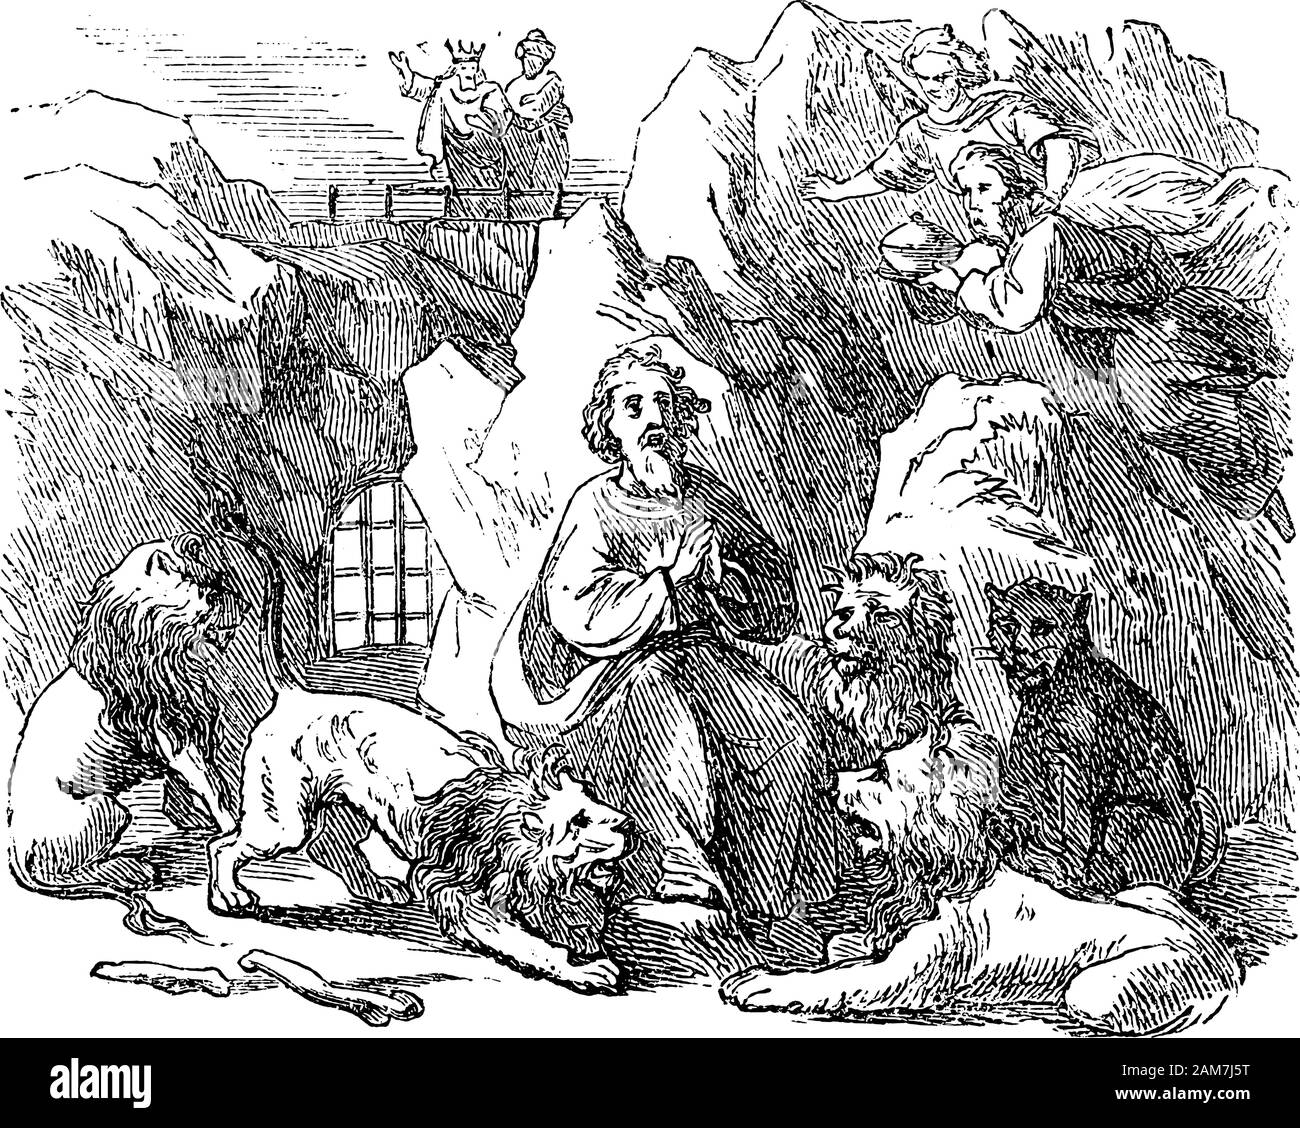 Vintage drawing or engraving of biblical story of prophet Daniel Send in lion's den by king Darius of Babylon. Old Man surrounded by lions. Bible, Old Testament,Daniel 6. Biblische Geschichte , Germany 1859. Stock Vector